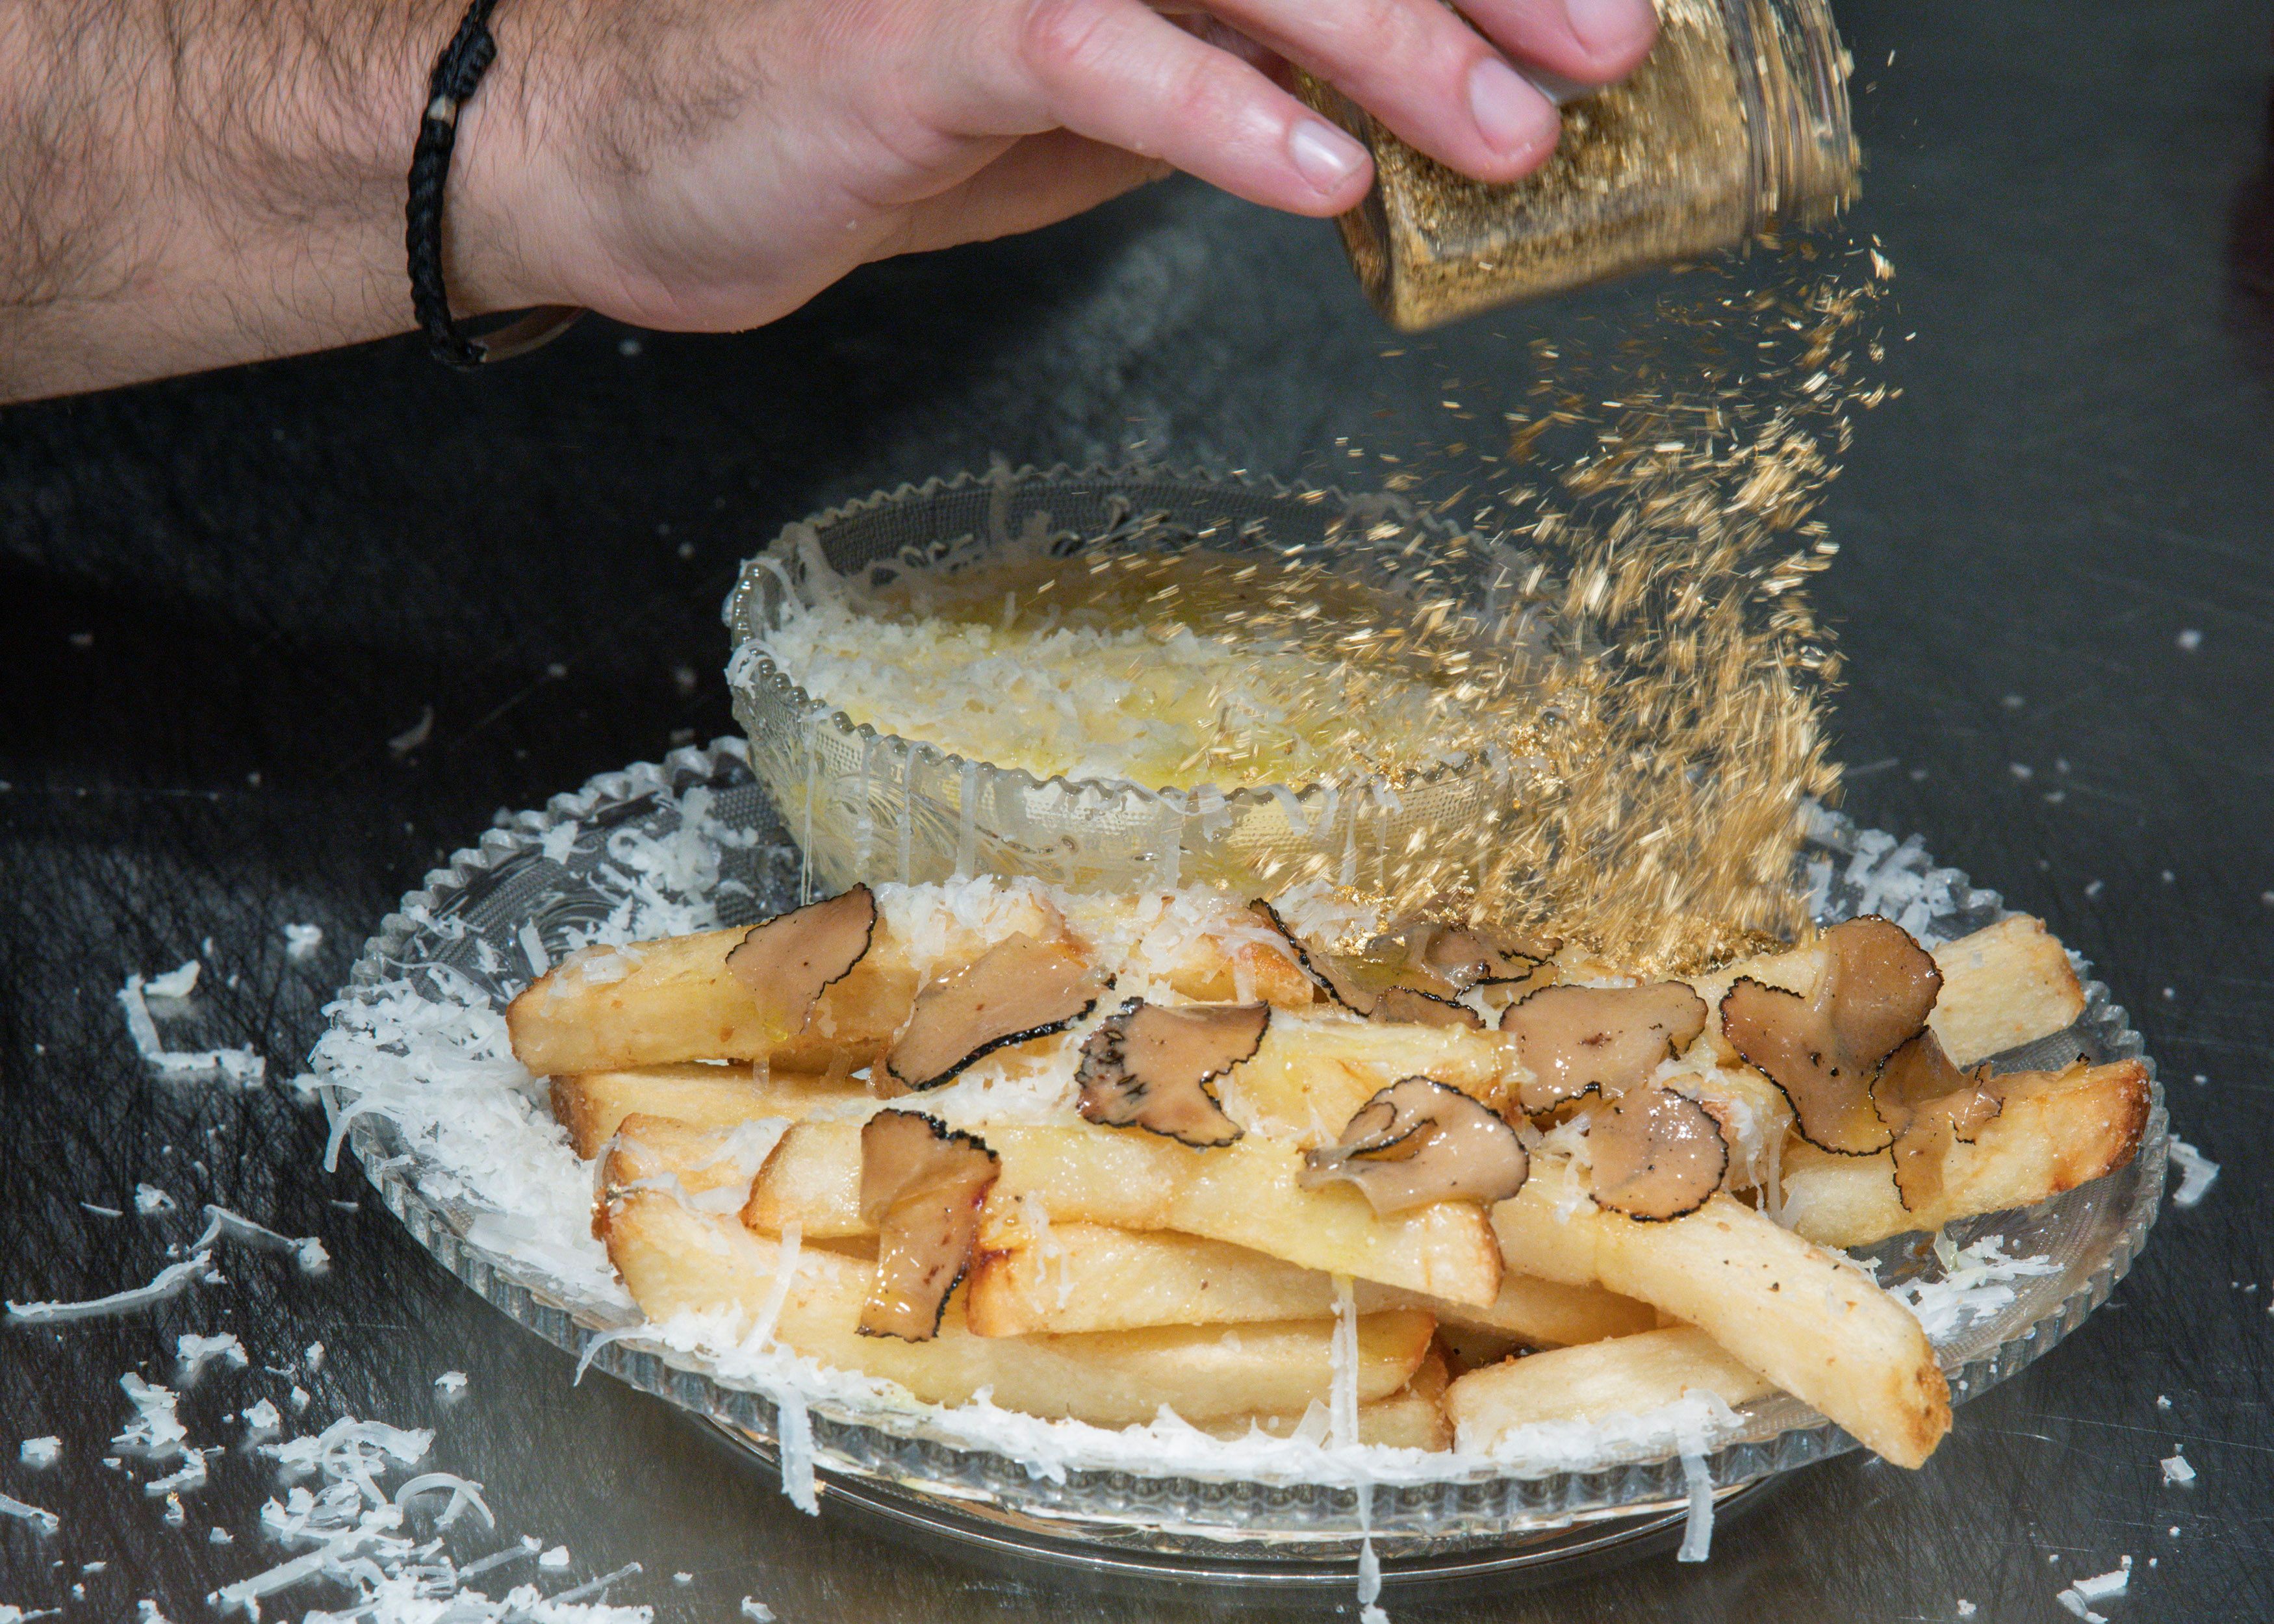 The Creme de la Creme Pommes Frites, the world's most expensive french fries, according to the Guinness Book of World Records, are seen at Serendipity 3 restaurant New York